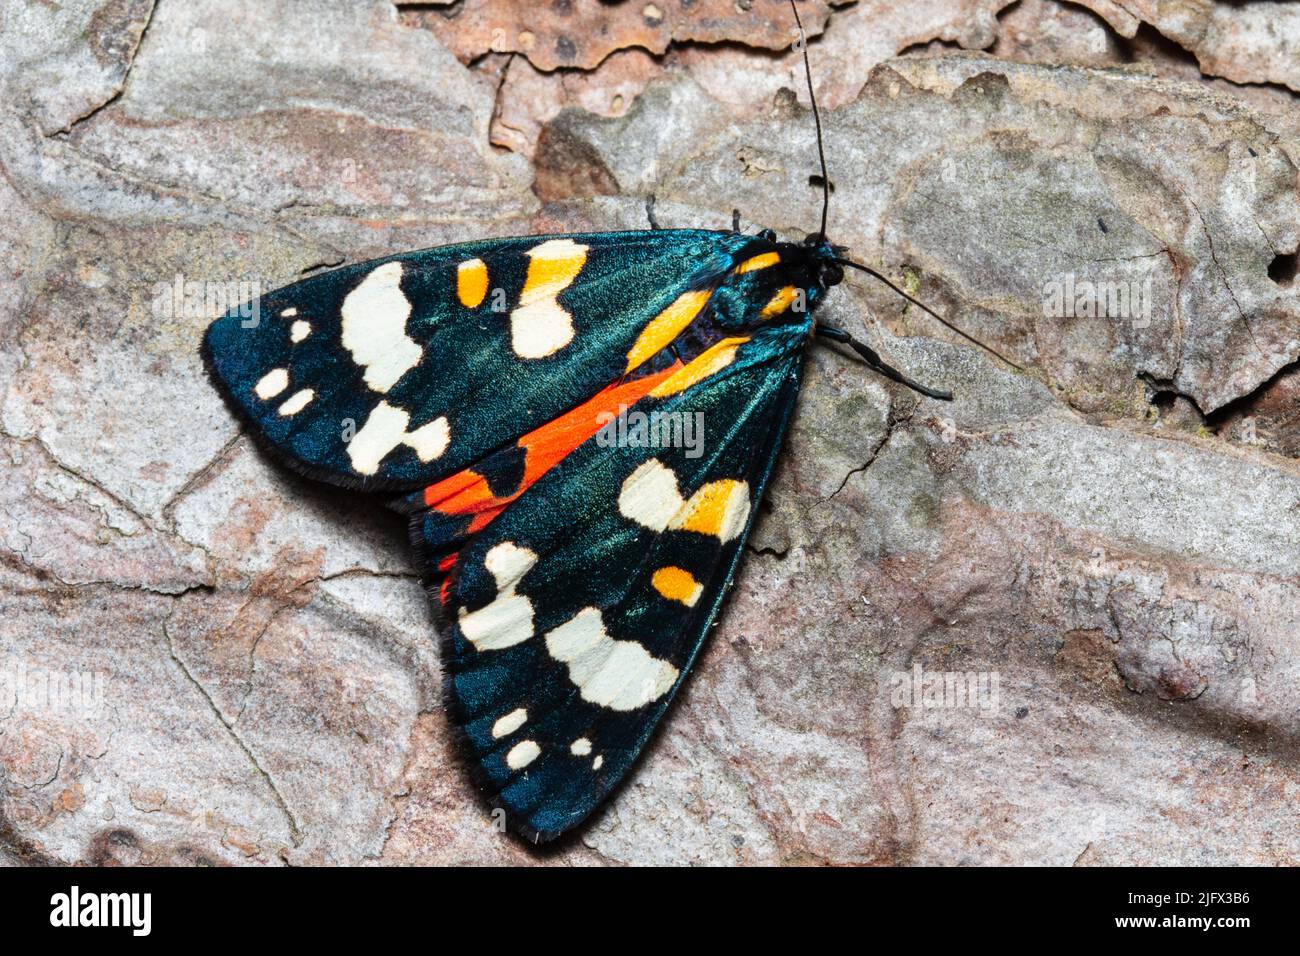 A scarlet tiger moth, Callimorpha dominula, formerly Panaxia dominula, resting on the bark of a tree. Stock Photo